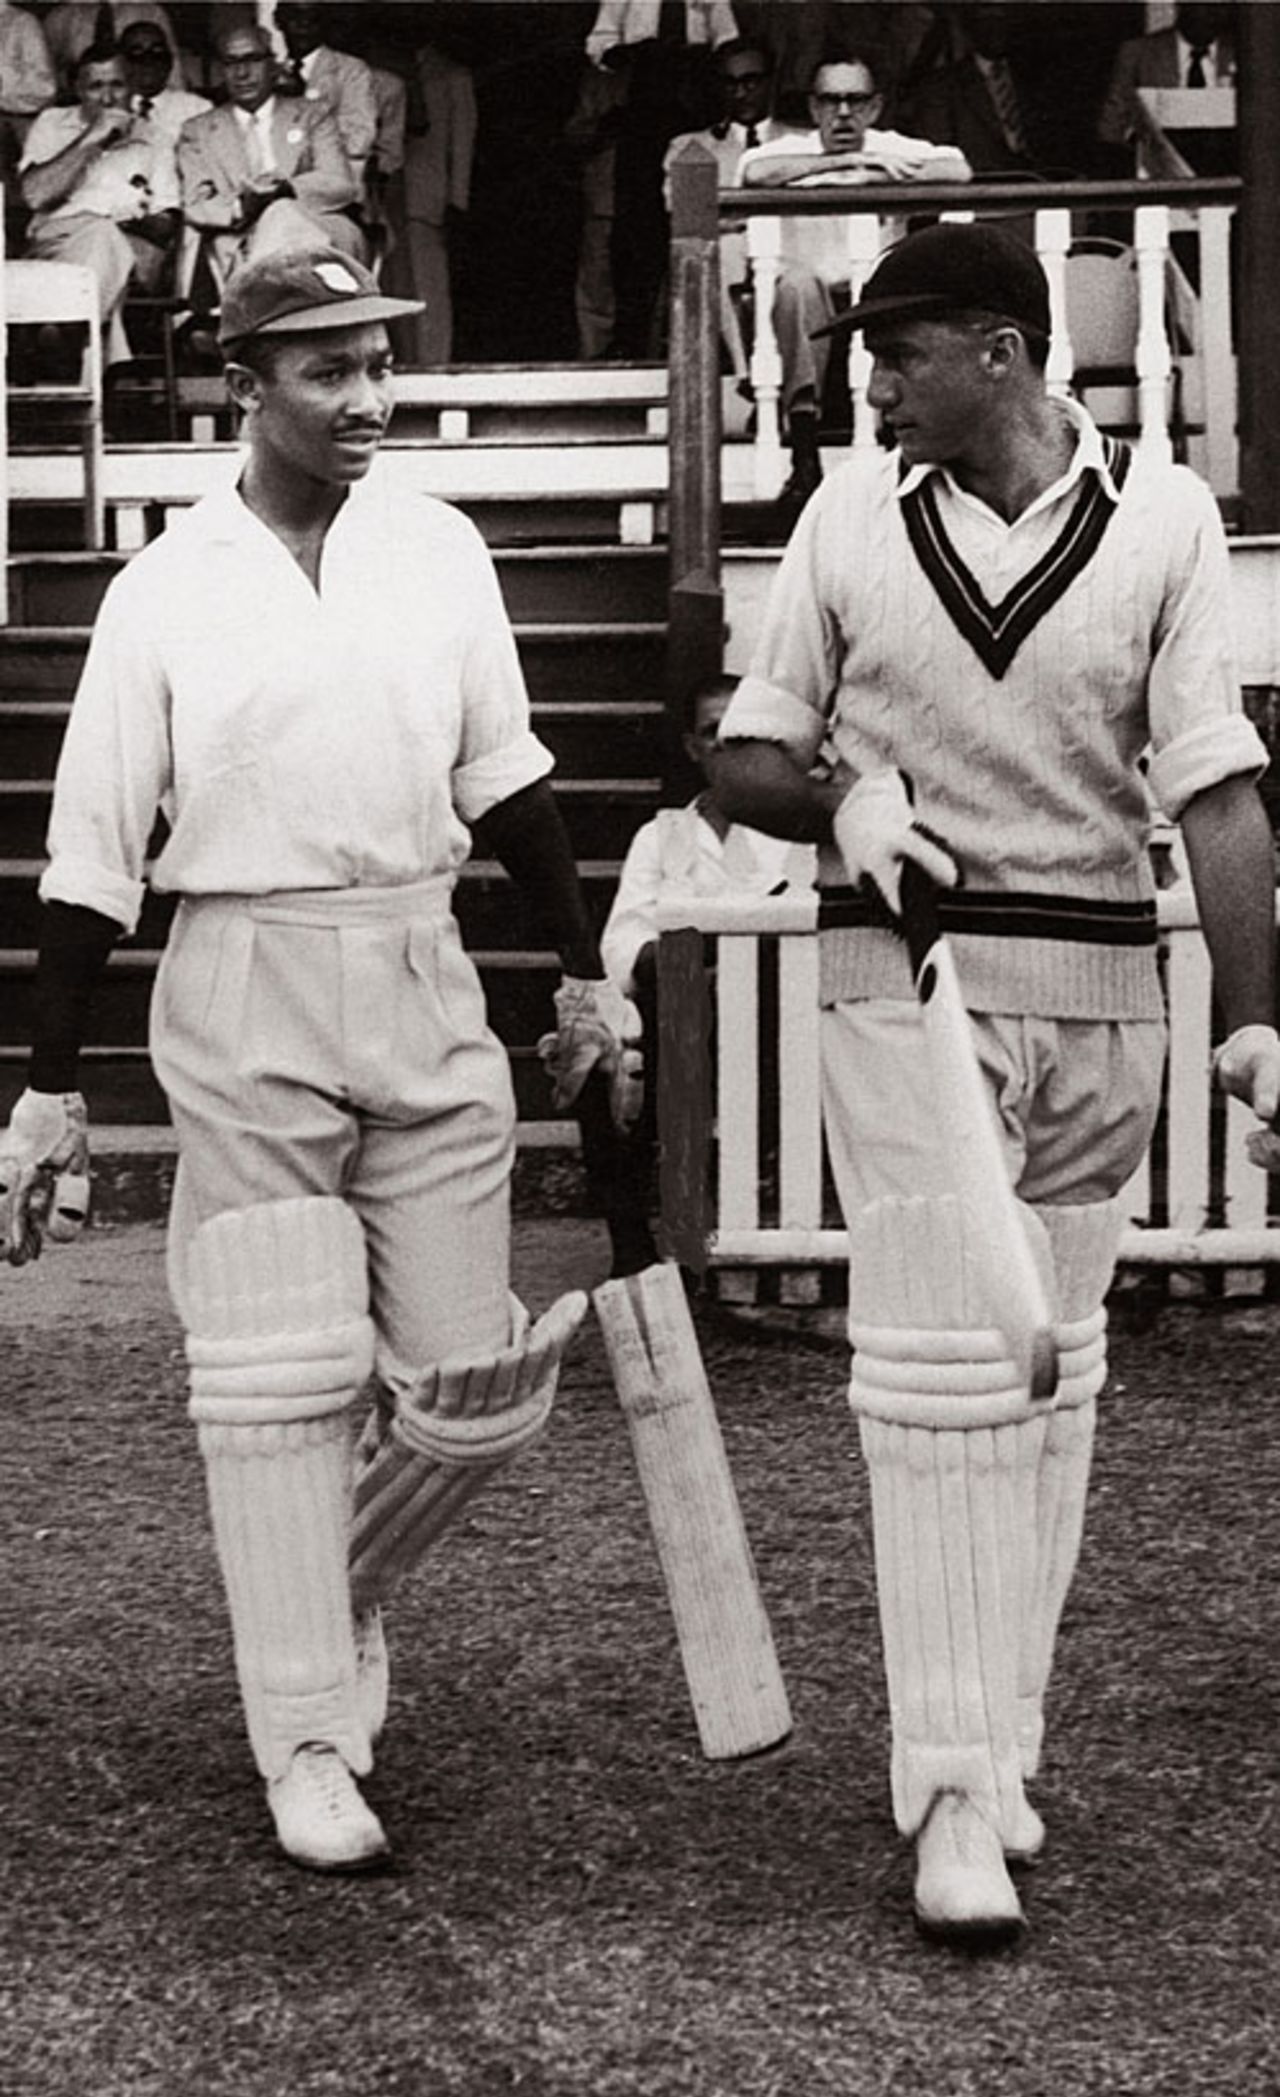 Frank Worrell and Jeff Stollmeyer walk in to bat, West Indies v England, 3rd Test, Georgetown, February 26, 1954